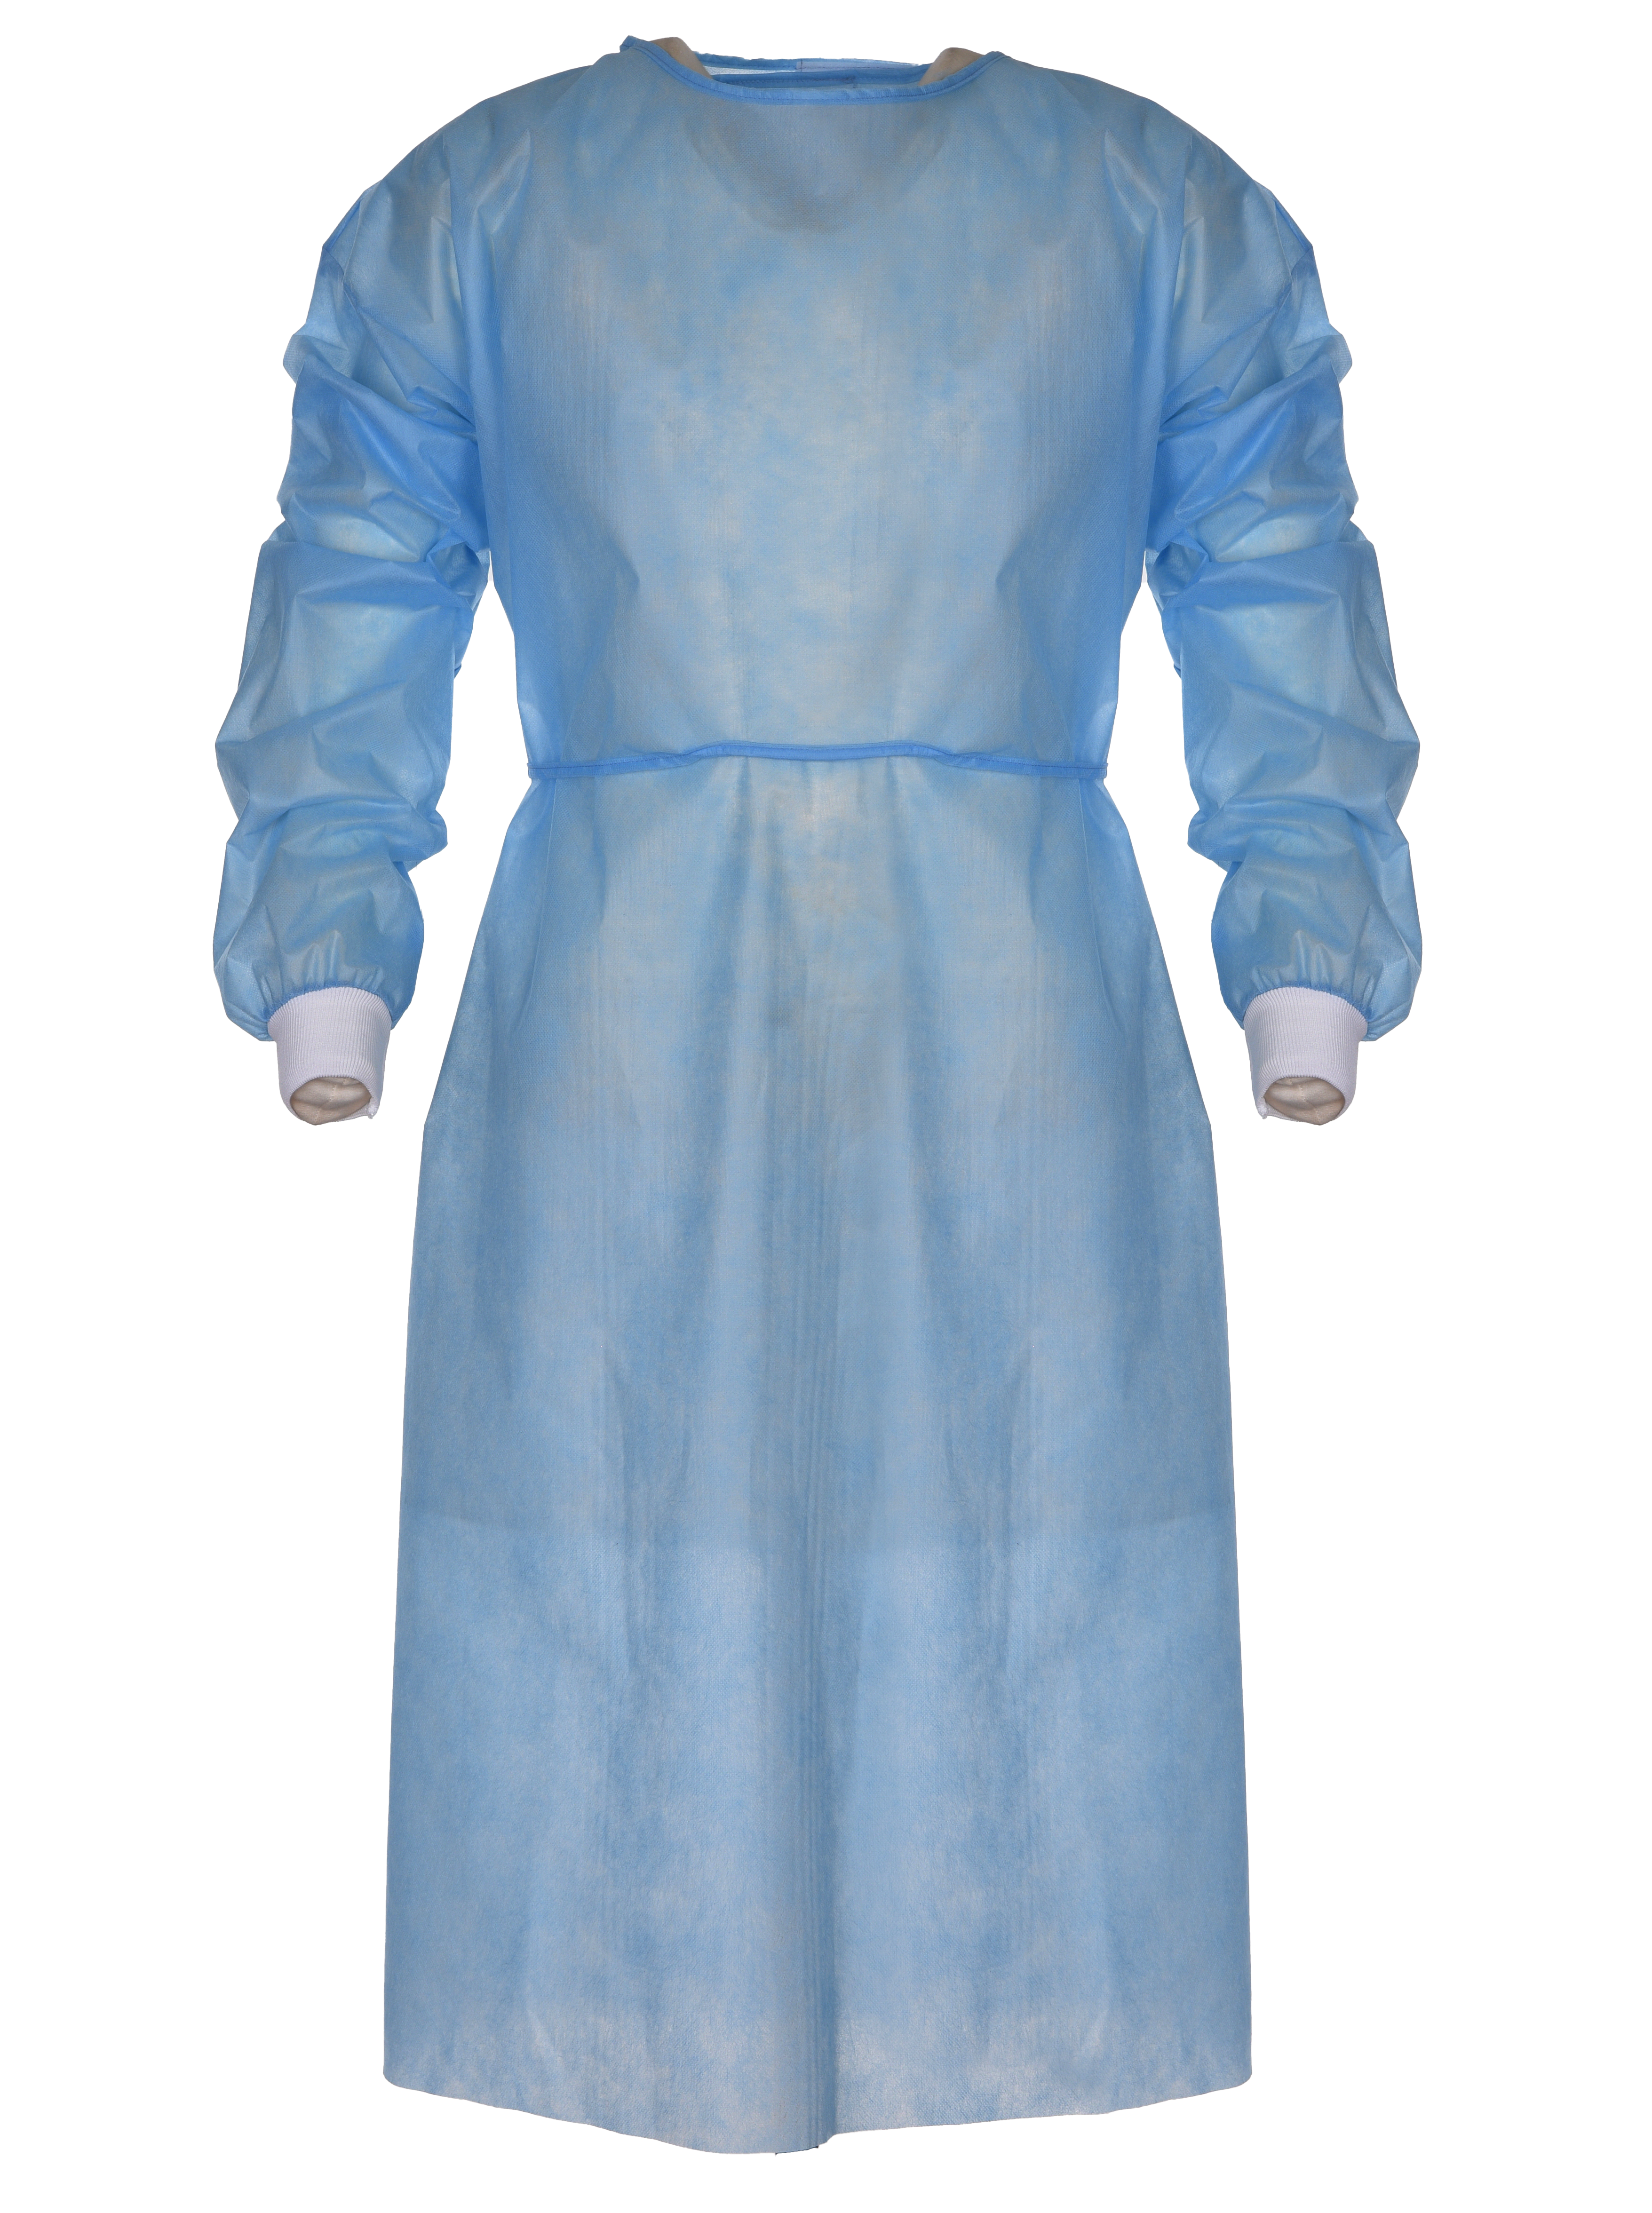 LEVEL 3 ISOLATION GOWN _ DH_3000